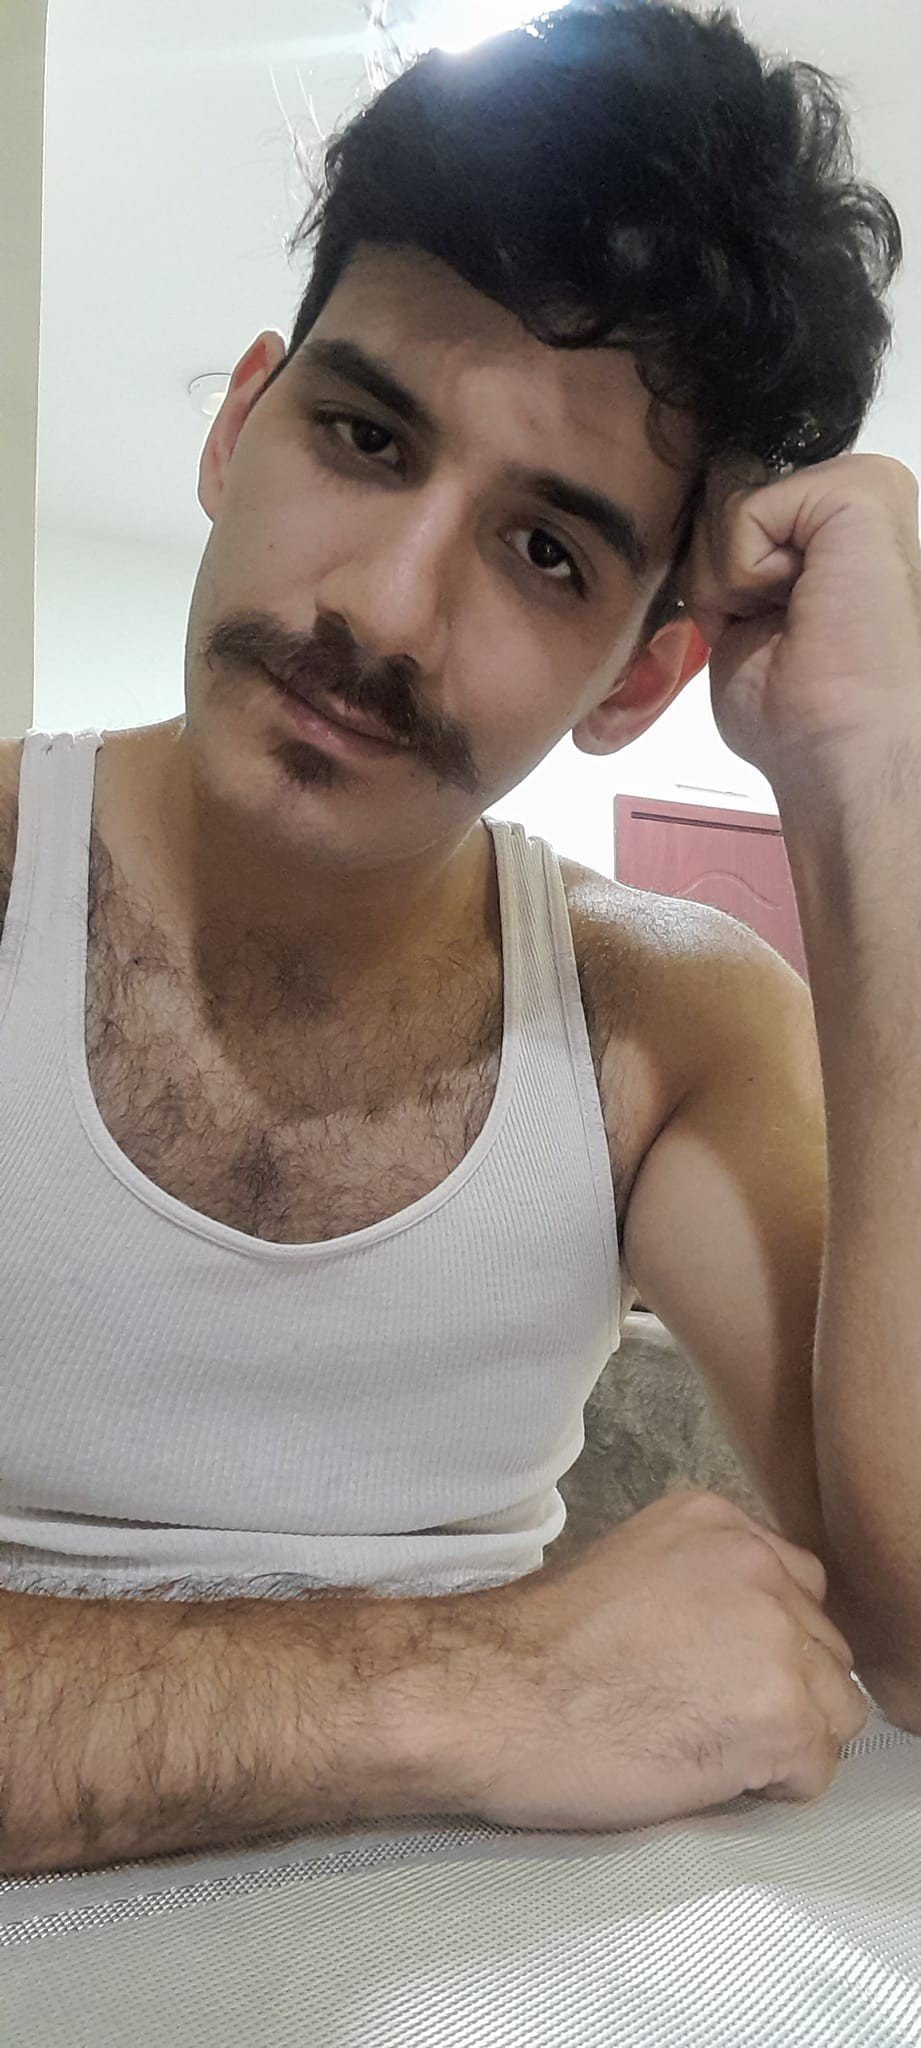 Watch the Photo by DirtyDaddyFunStuff with the username @DirtyDaddyPorn, who is a verified user, posted on February 27, 2024 and the text says 'Hot Fun 10 #hairy #otters #armpits #muscles #mustaches #stubble'